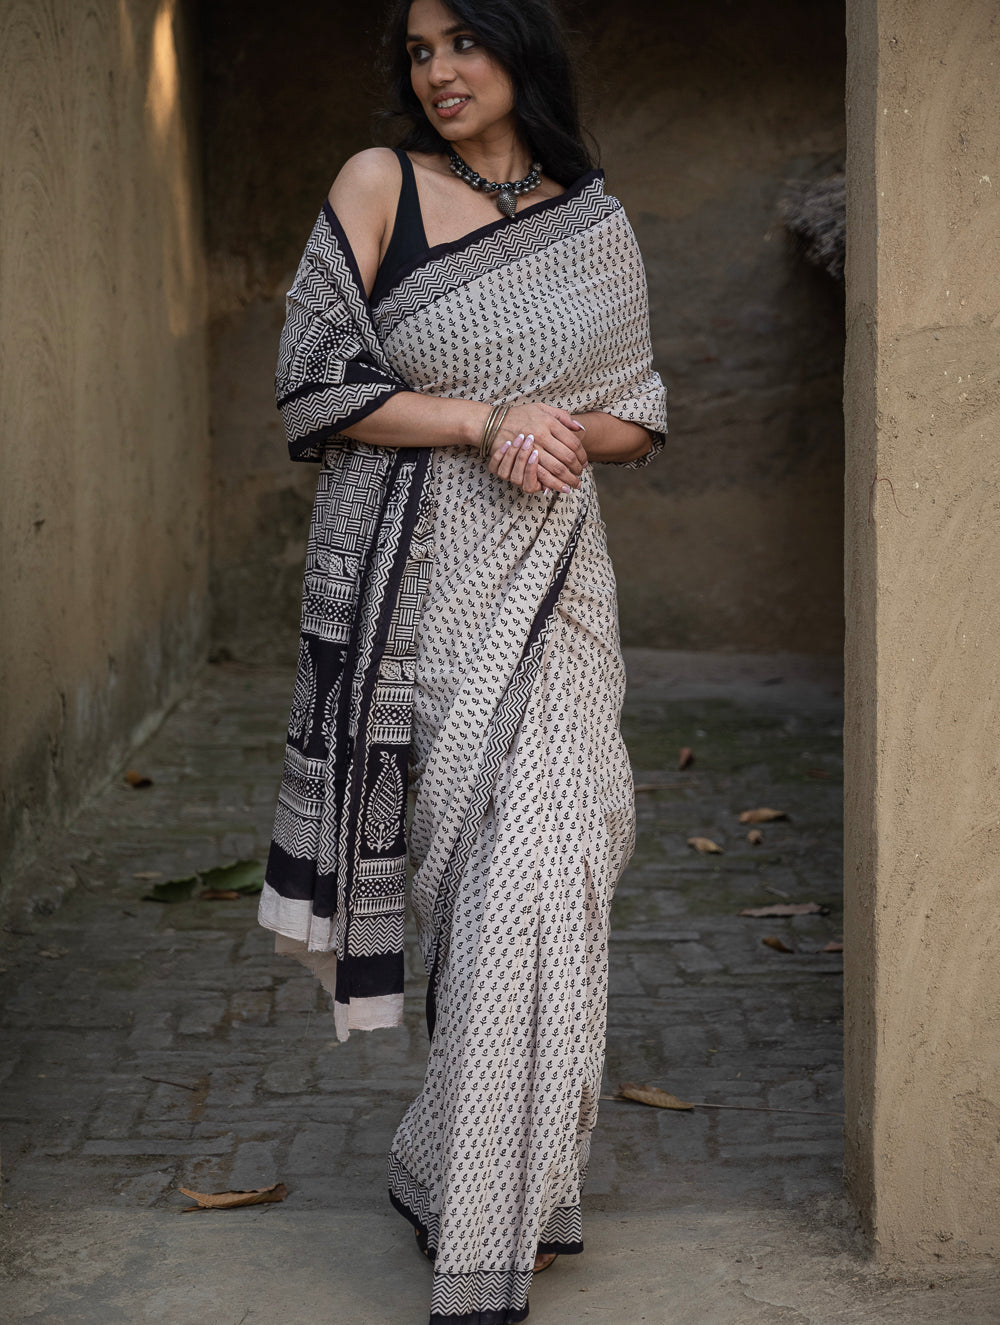 Load image into Gallery viewer, Exclusive Bagh Hand Block Printed Cotton Saree - Black Florets